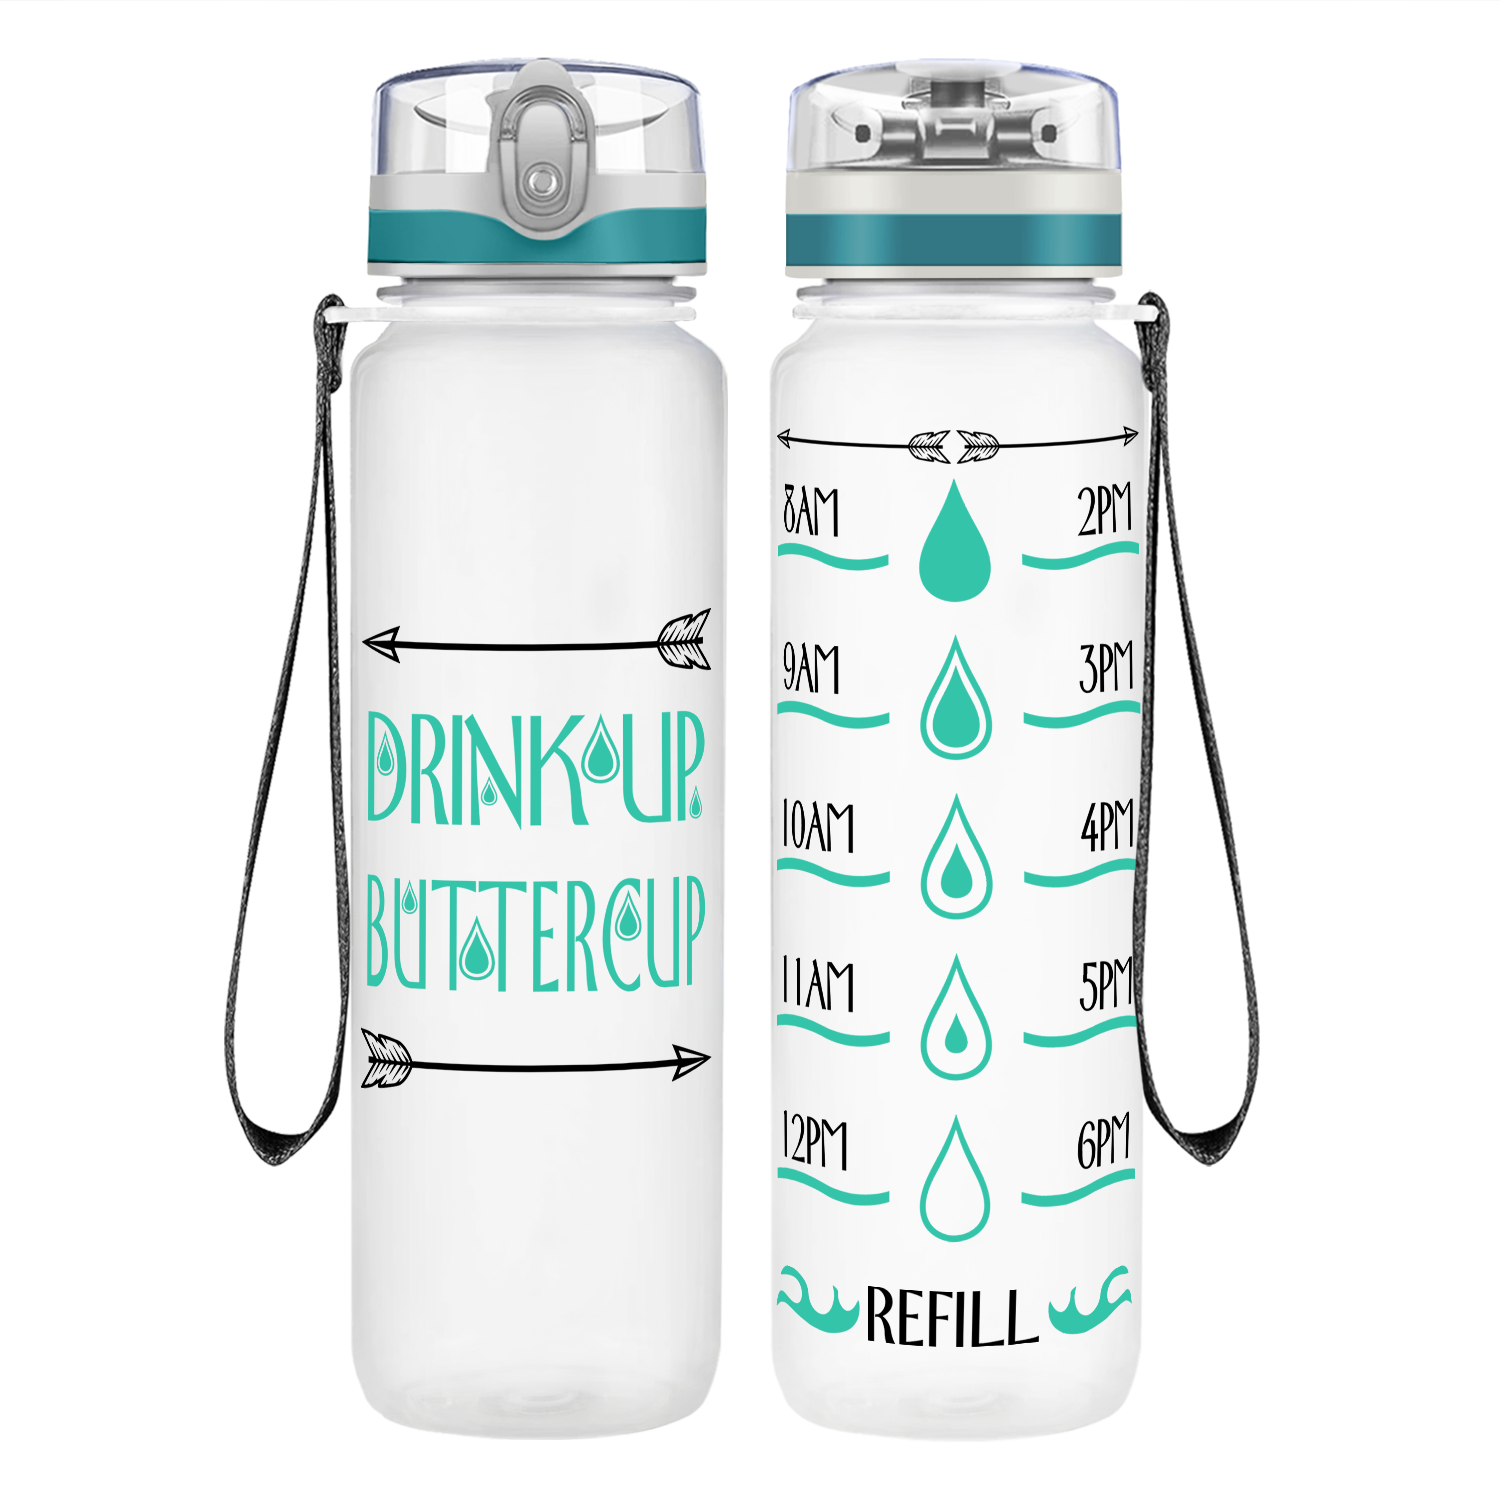 Buttercup Drink Up on 32 oz Motivational Tracking Water Bottle